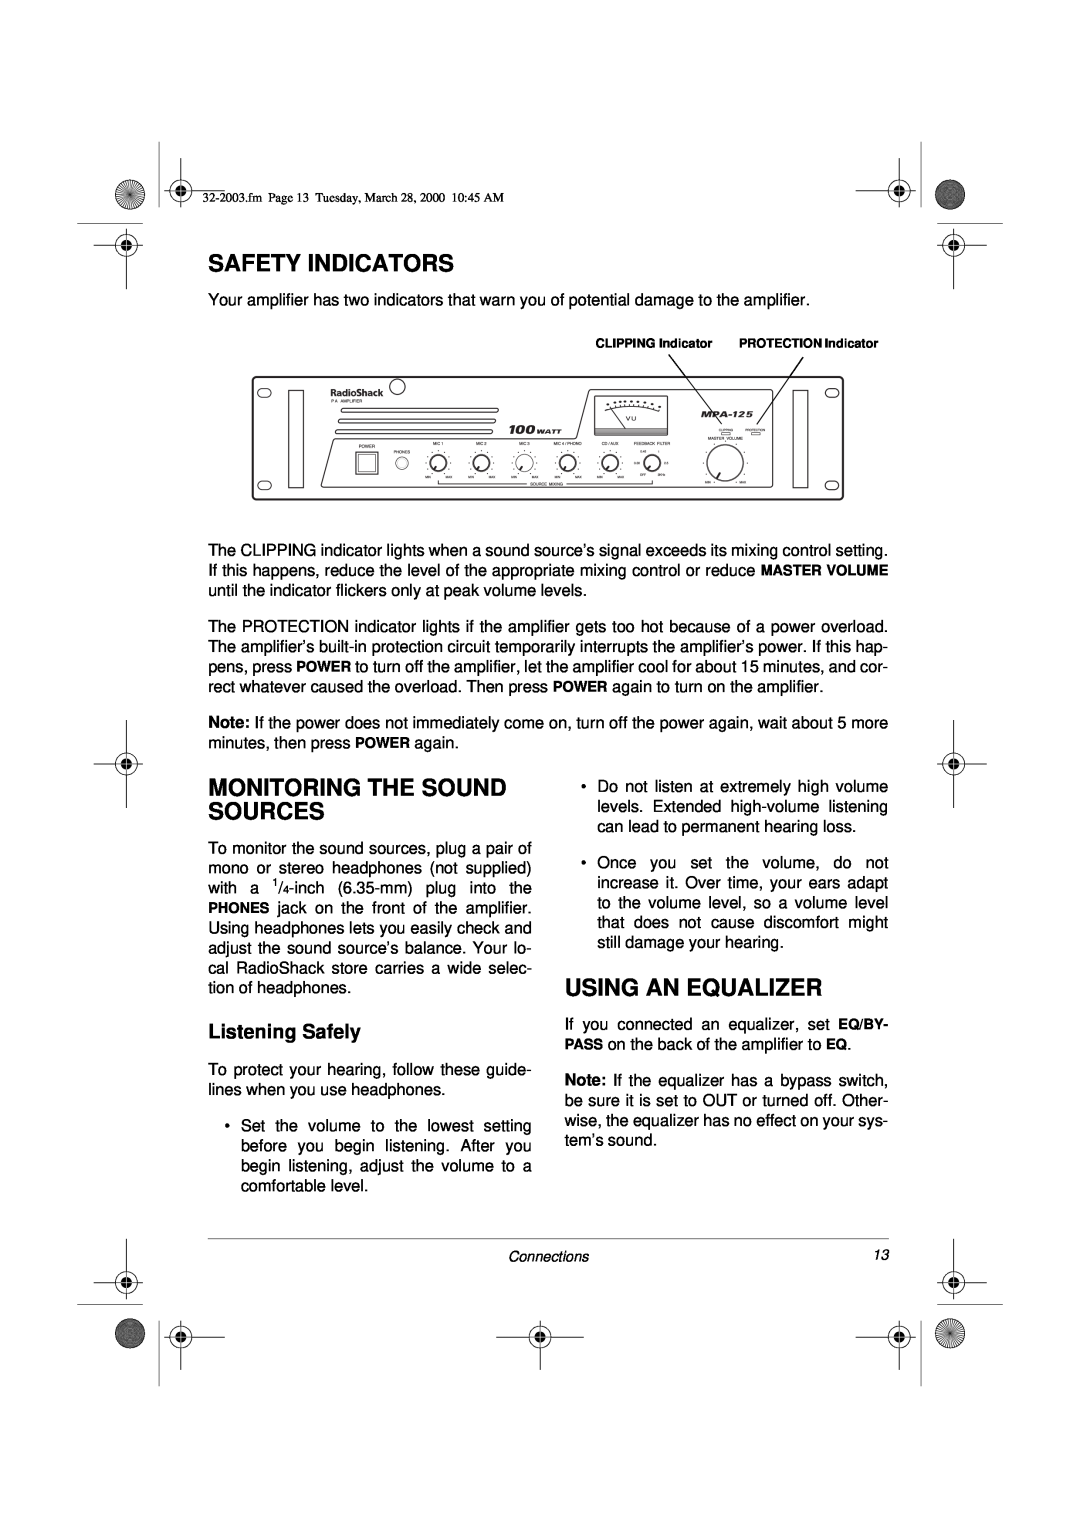 Radio Shack MPA-125 owner manual Safety Indicators, Monitoring The Sound Sources, Using An Equalizer, Listening Safely 